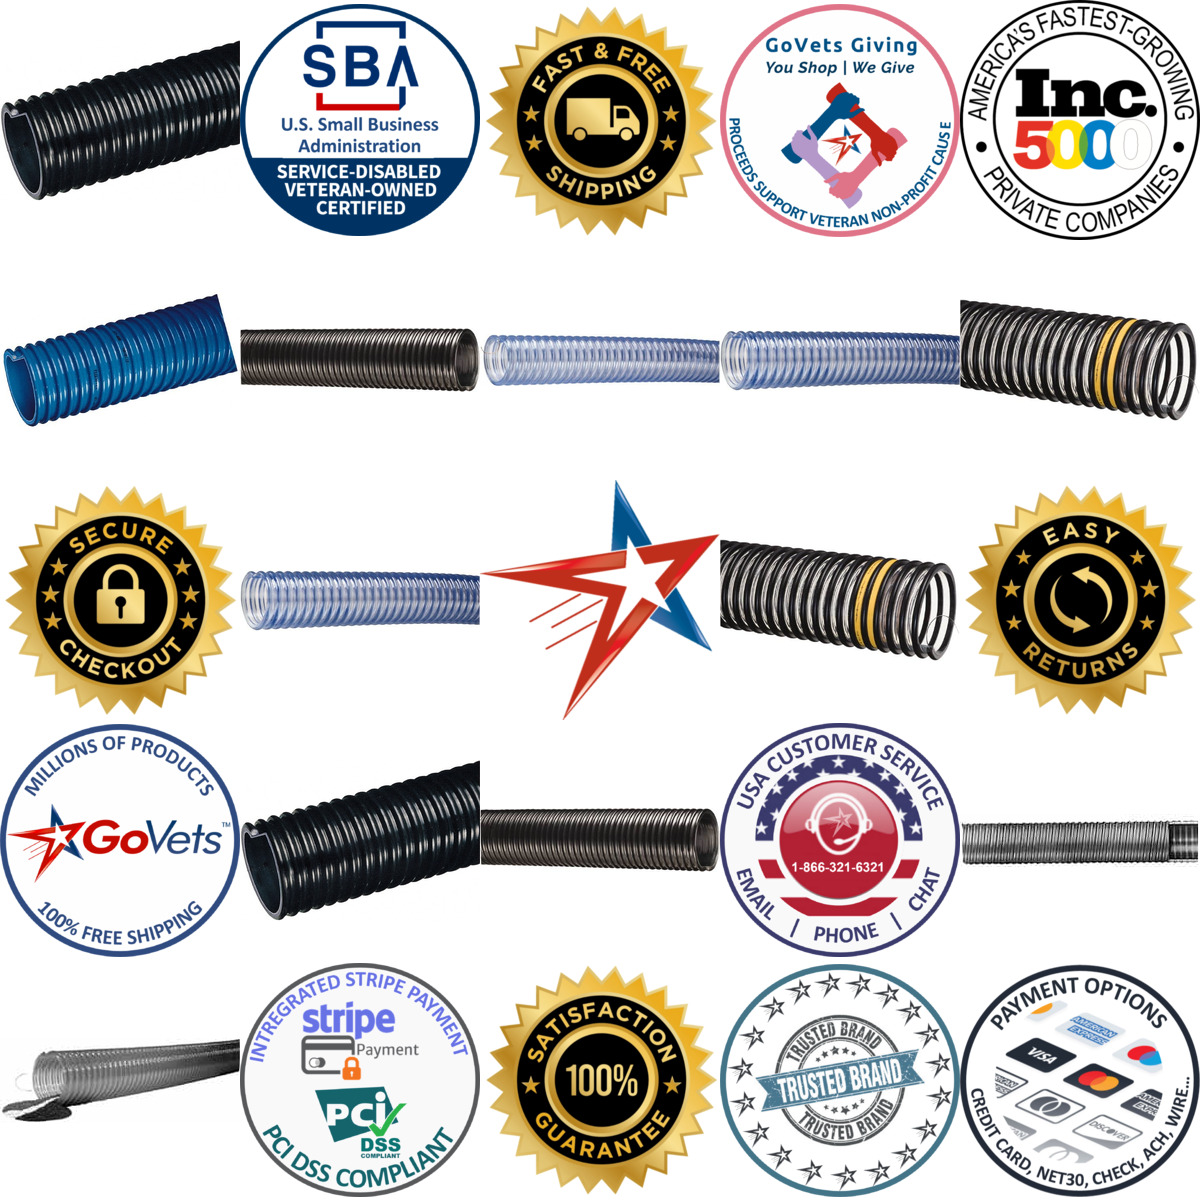 A selection of Dry Material Handling and Transfer Hose products on GoVets